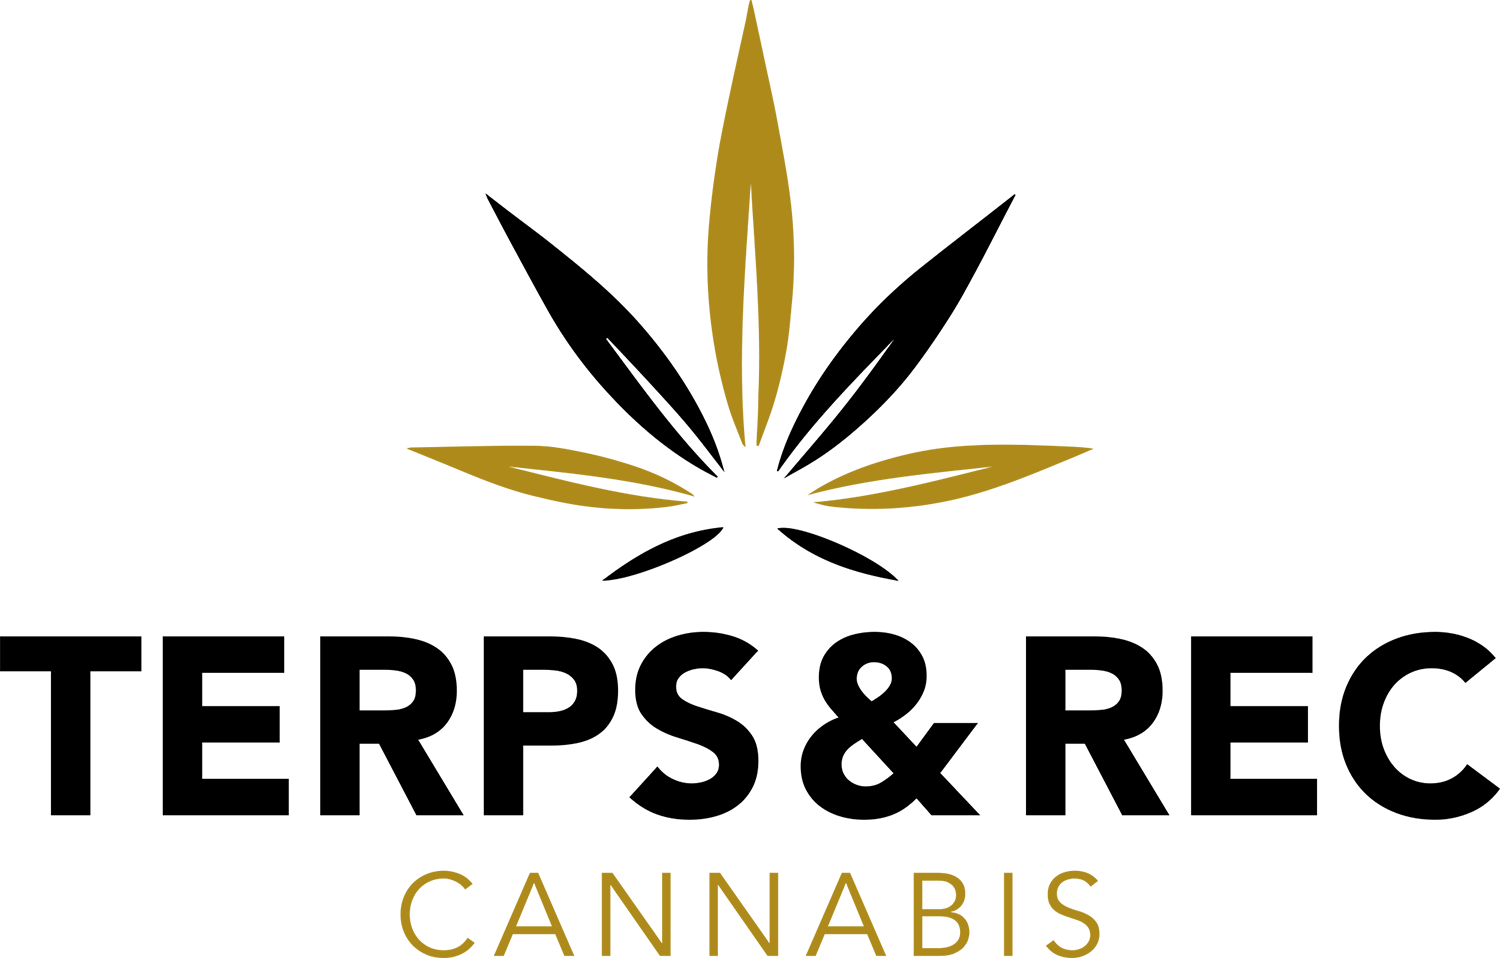 Terps and Rec - cannabis etobicoke